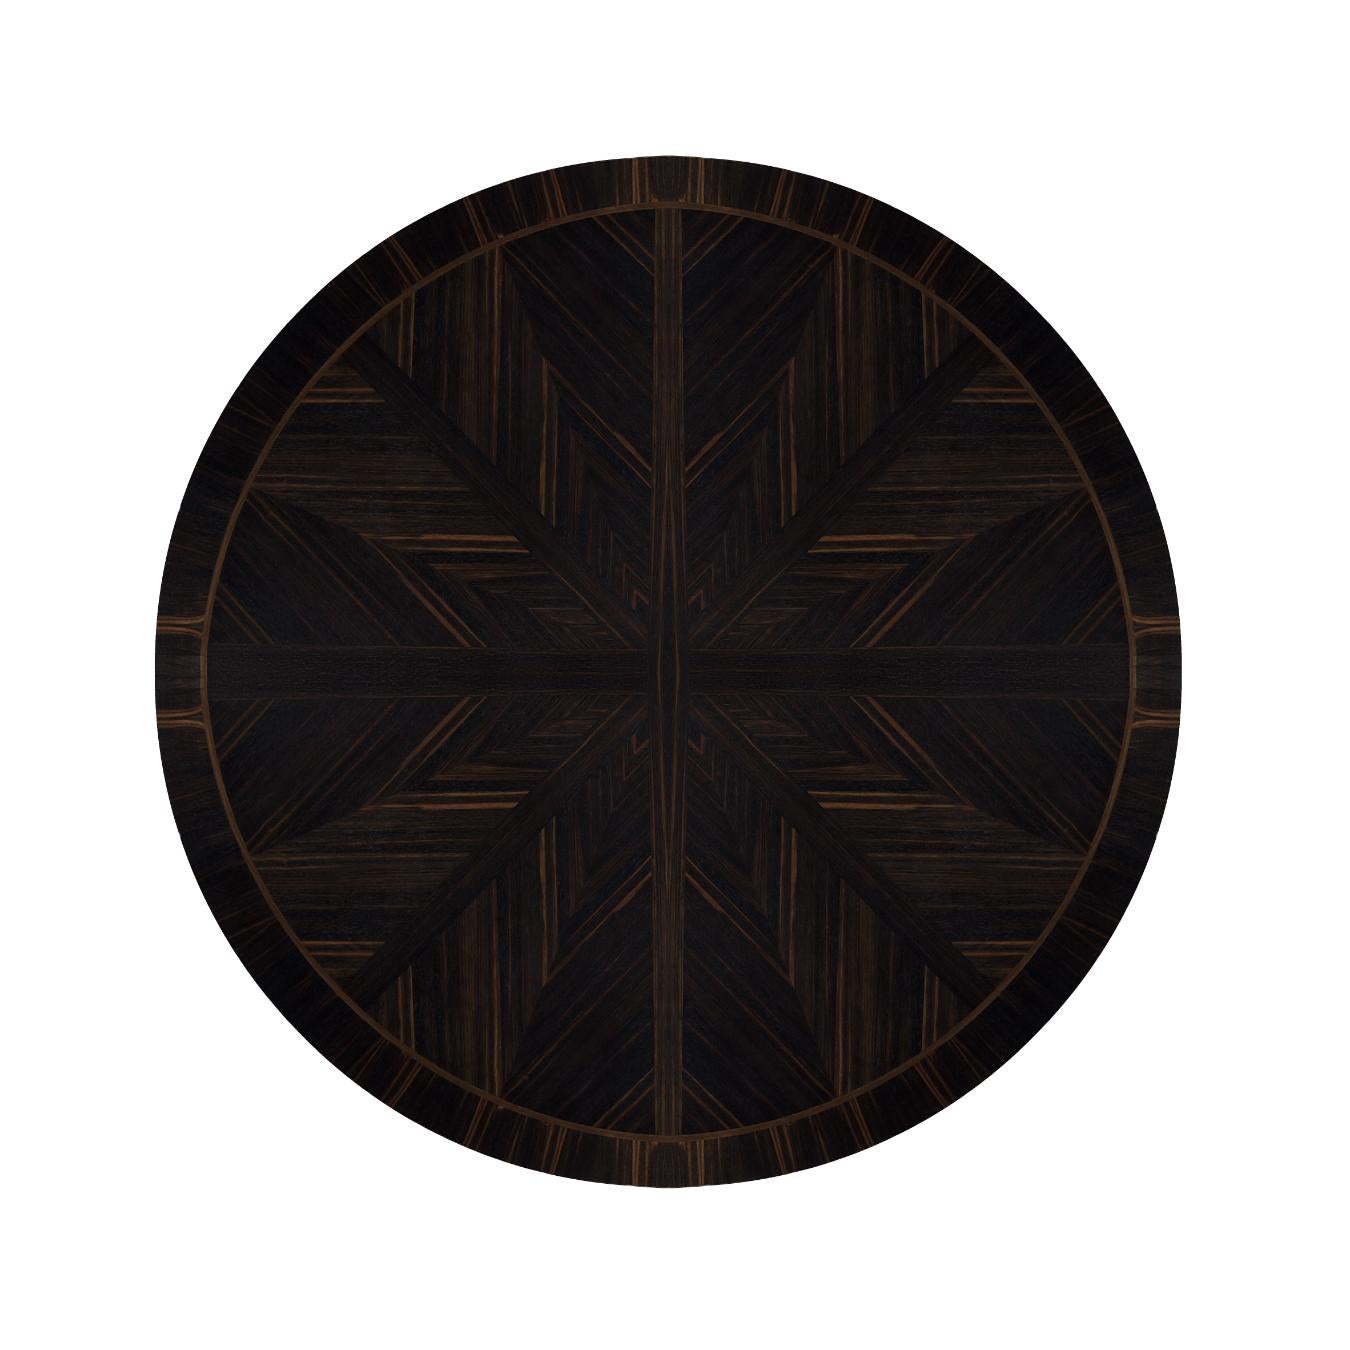 Inspired by the elegance of Art Deco, its base is formed with concave arcs. The tabletop has a unique star design made of ebony veneer. This piece is completed with a waxed finish, which gives it a casual look.
   